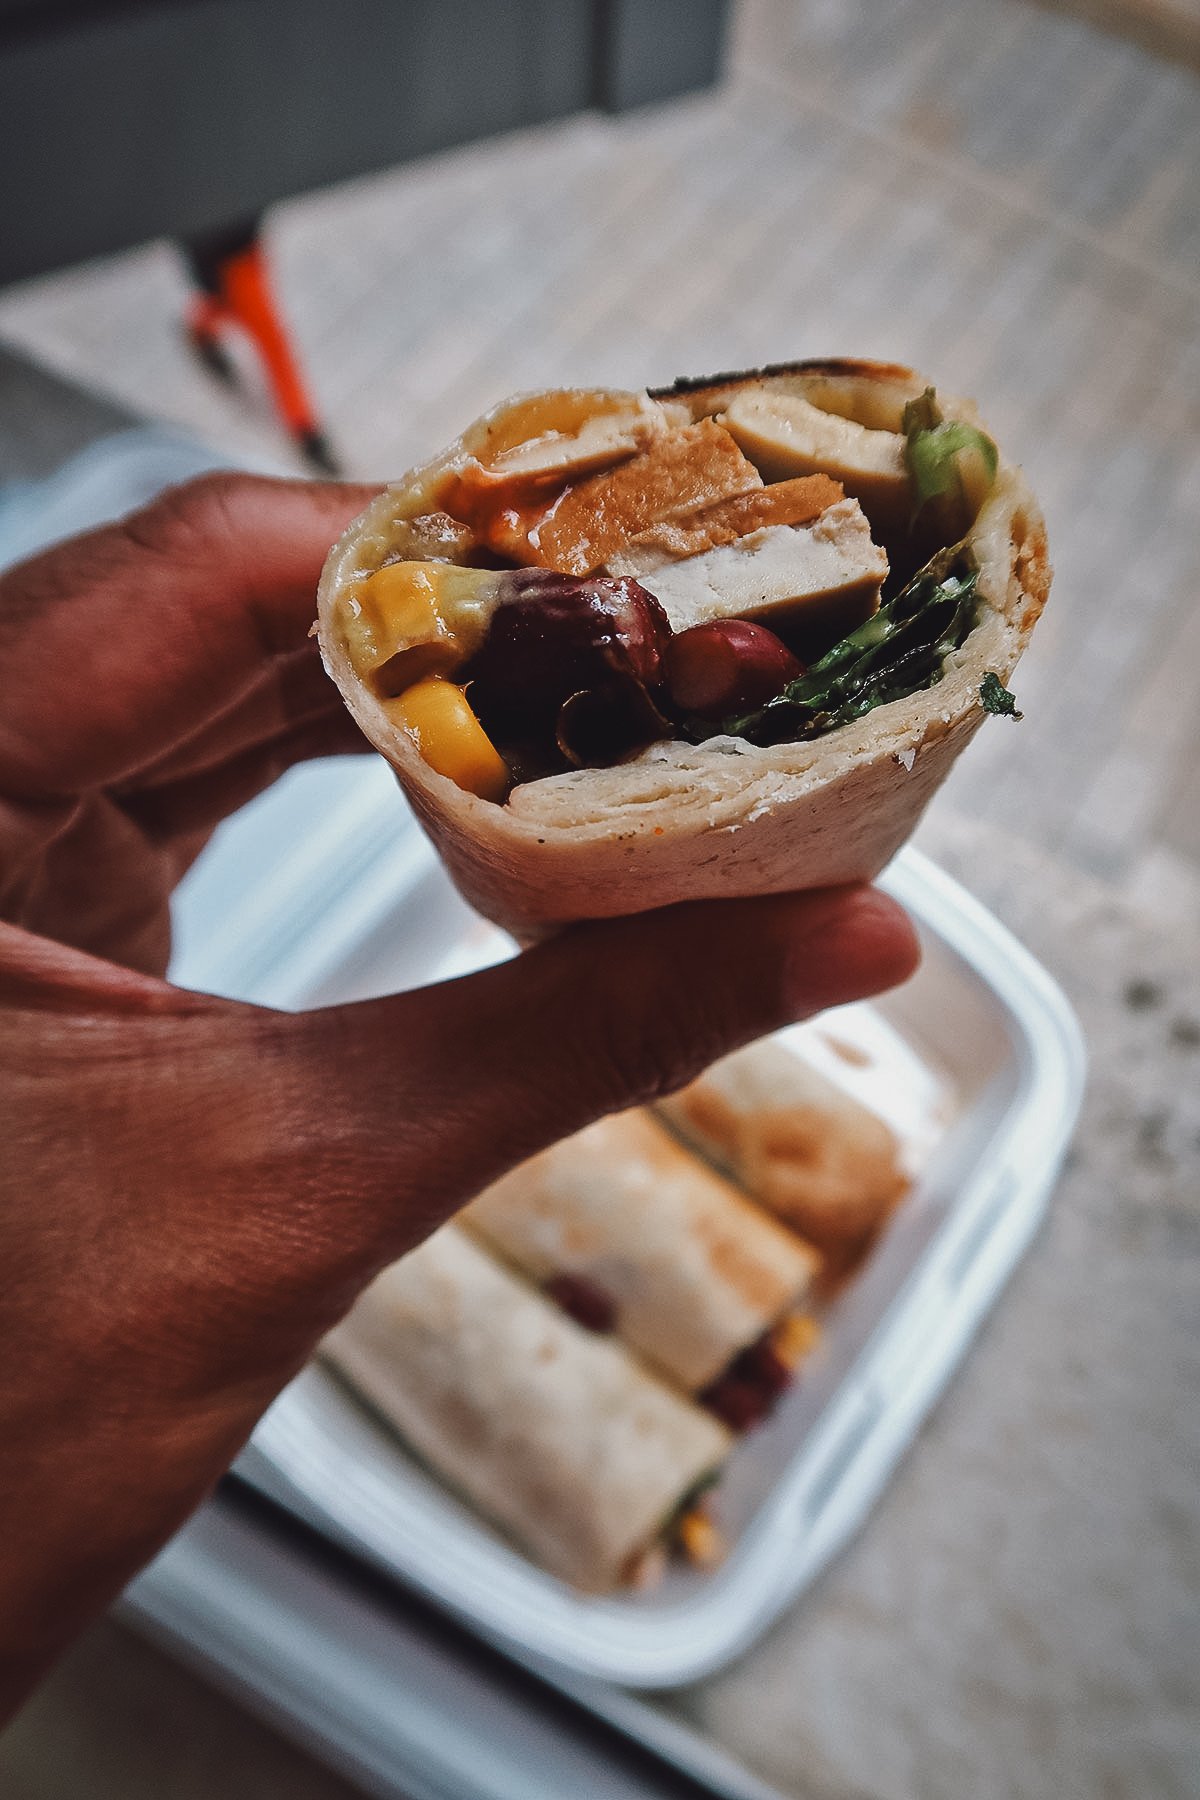 Inside the tofu wrap from a restaurant in Rovinj